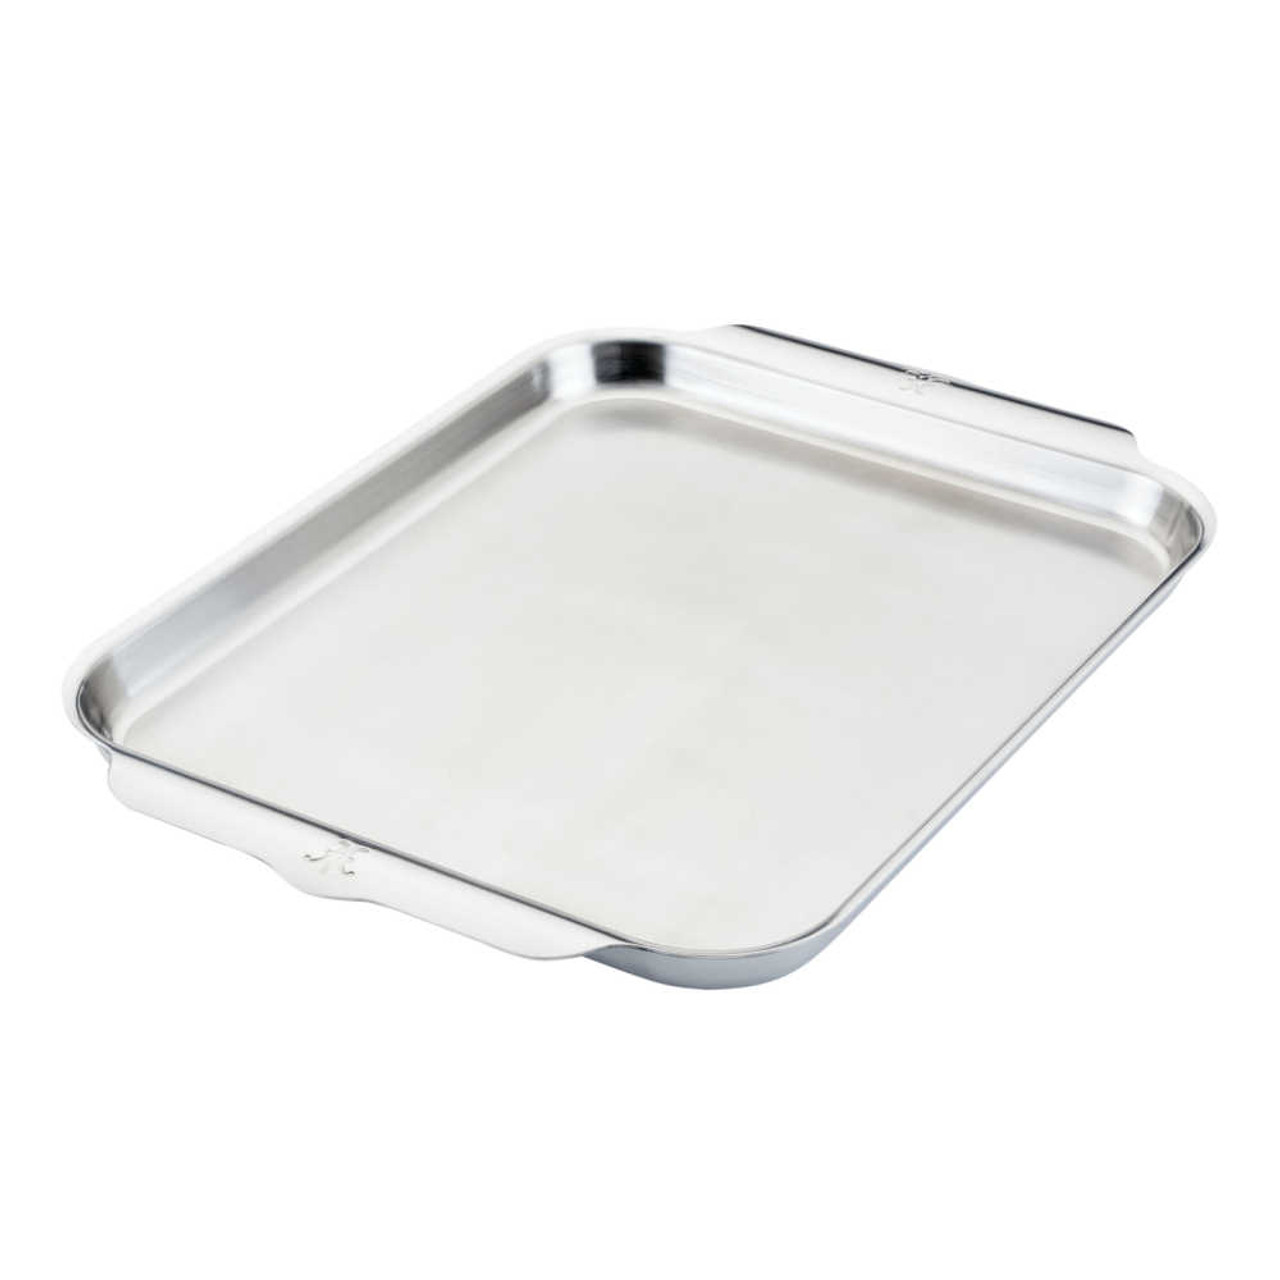 Nordic Ware Baker's Half Sheet Review: Classic and Durable